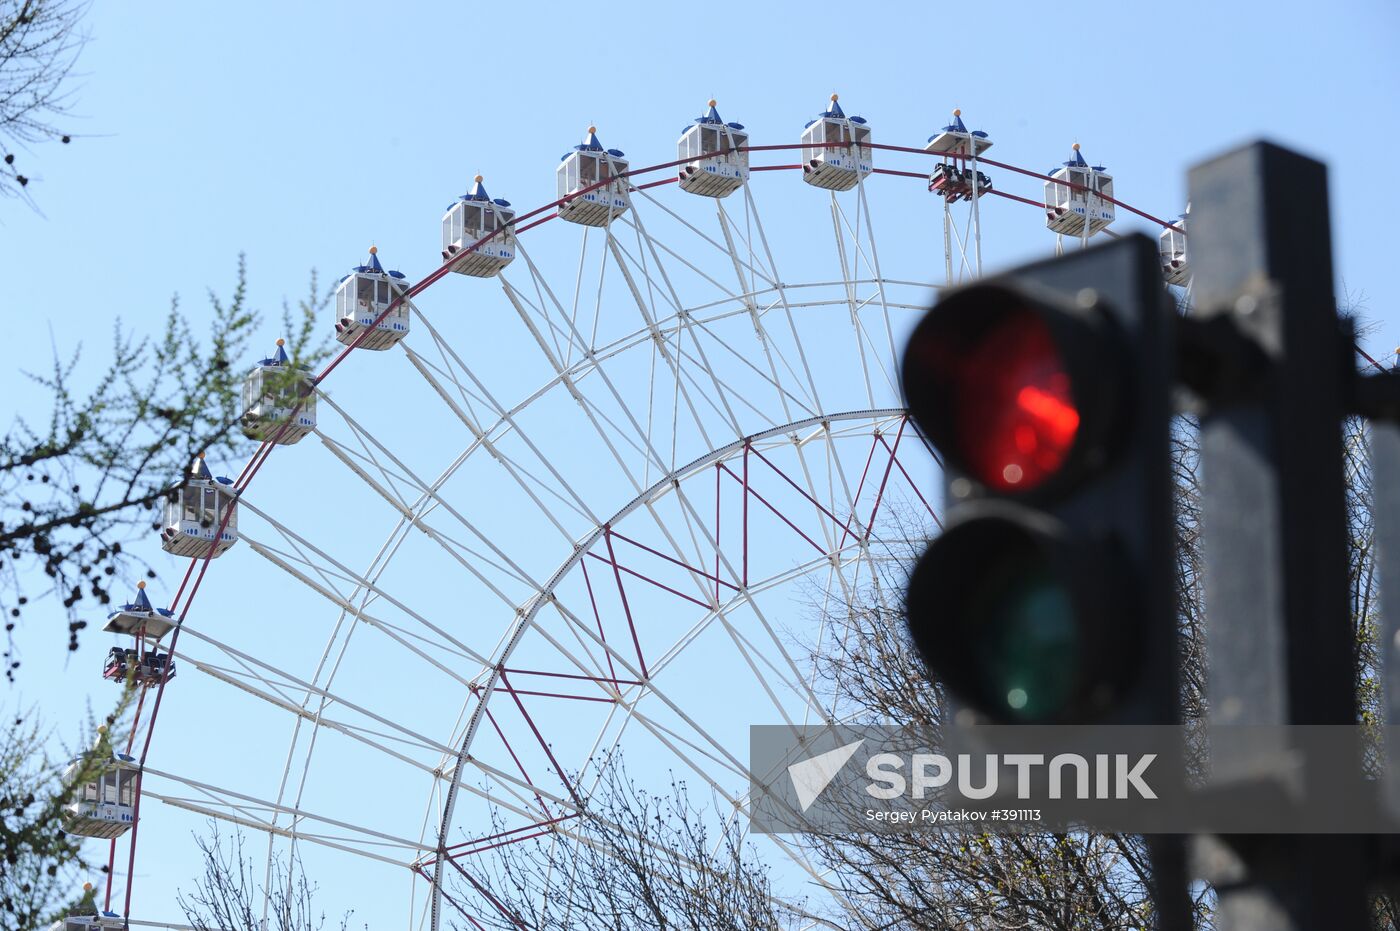 A Ferris wheel at the All-Russian Exhibition Center